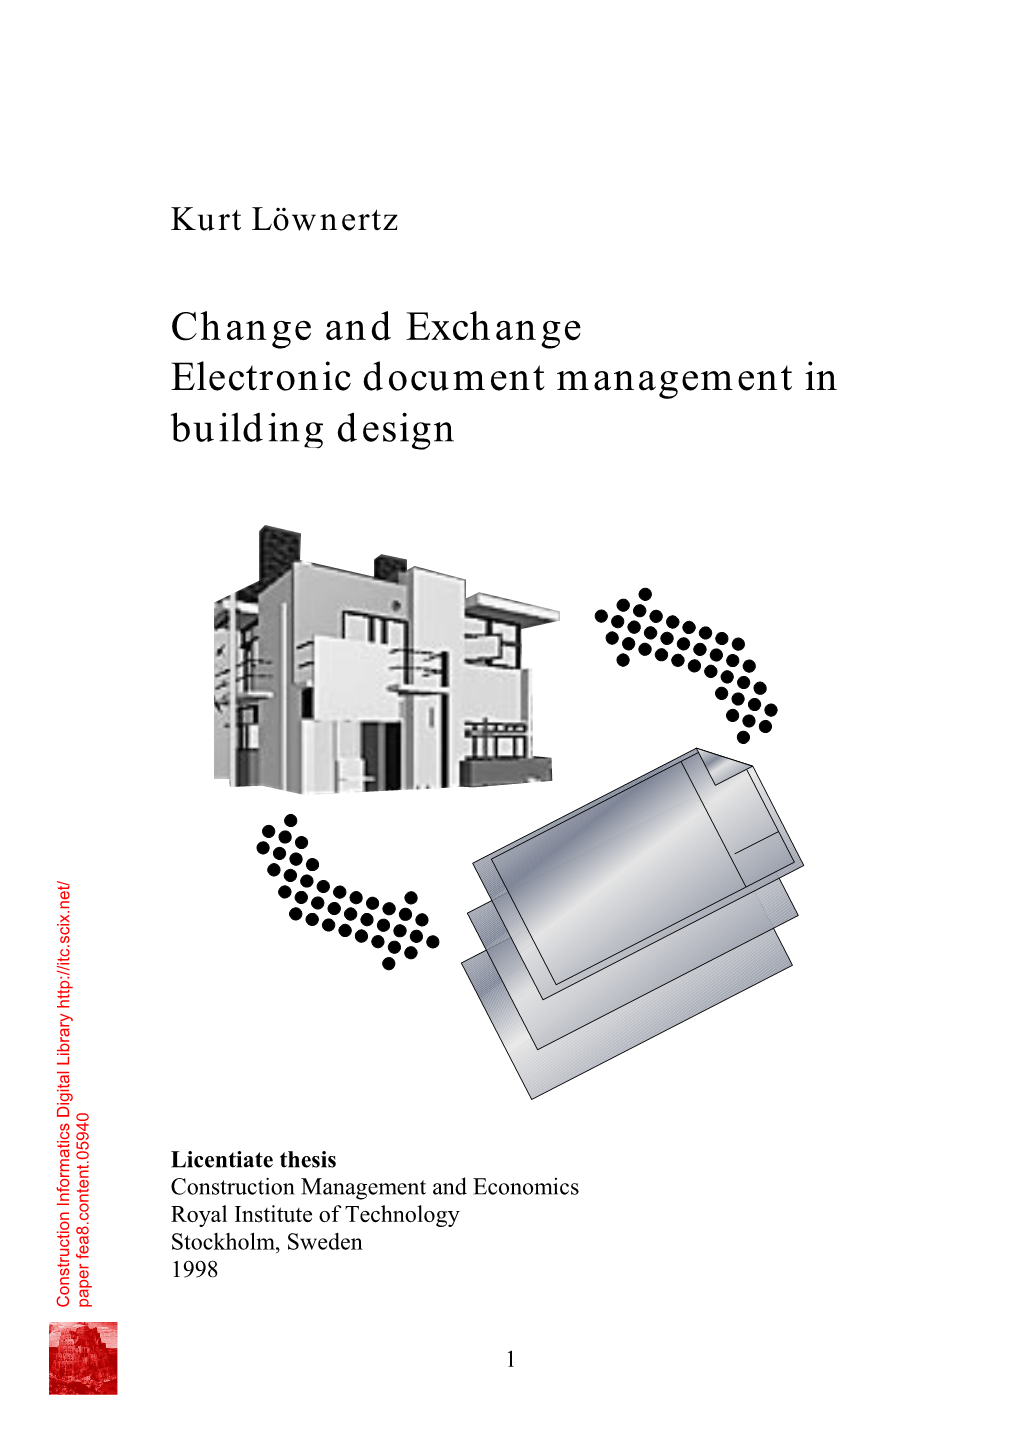 Change and Exchange Electronic Document Management in Building Design